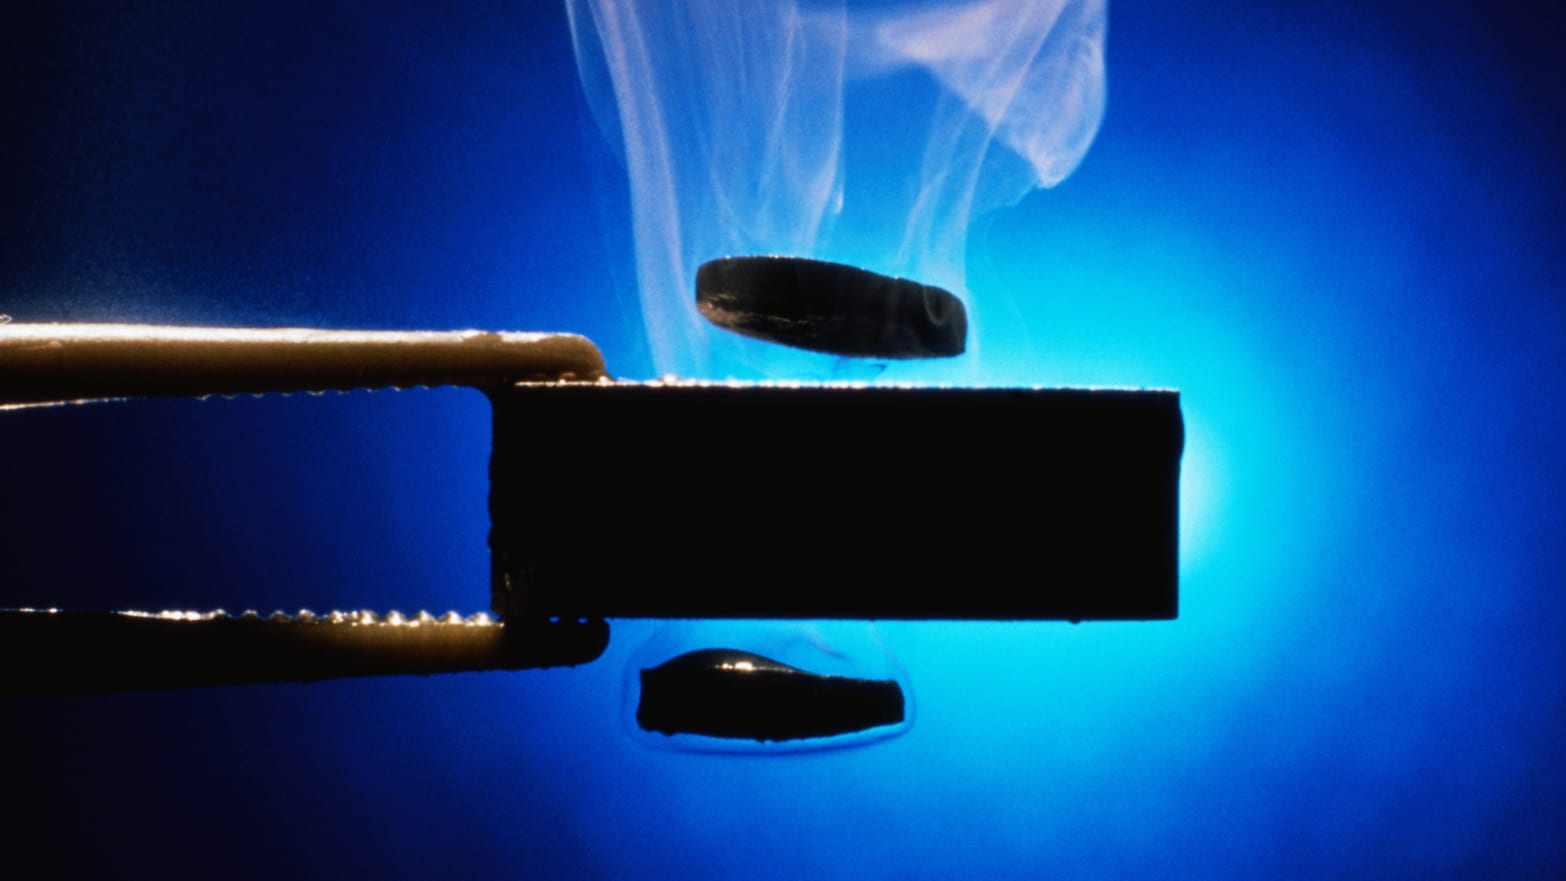 "A supercooled superconductor creates magnetic levitation, as well as steam, due to its low temperature."